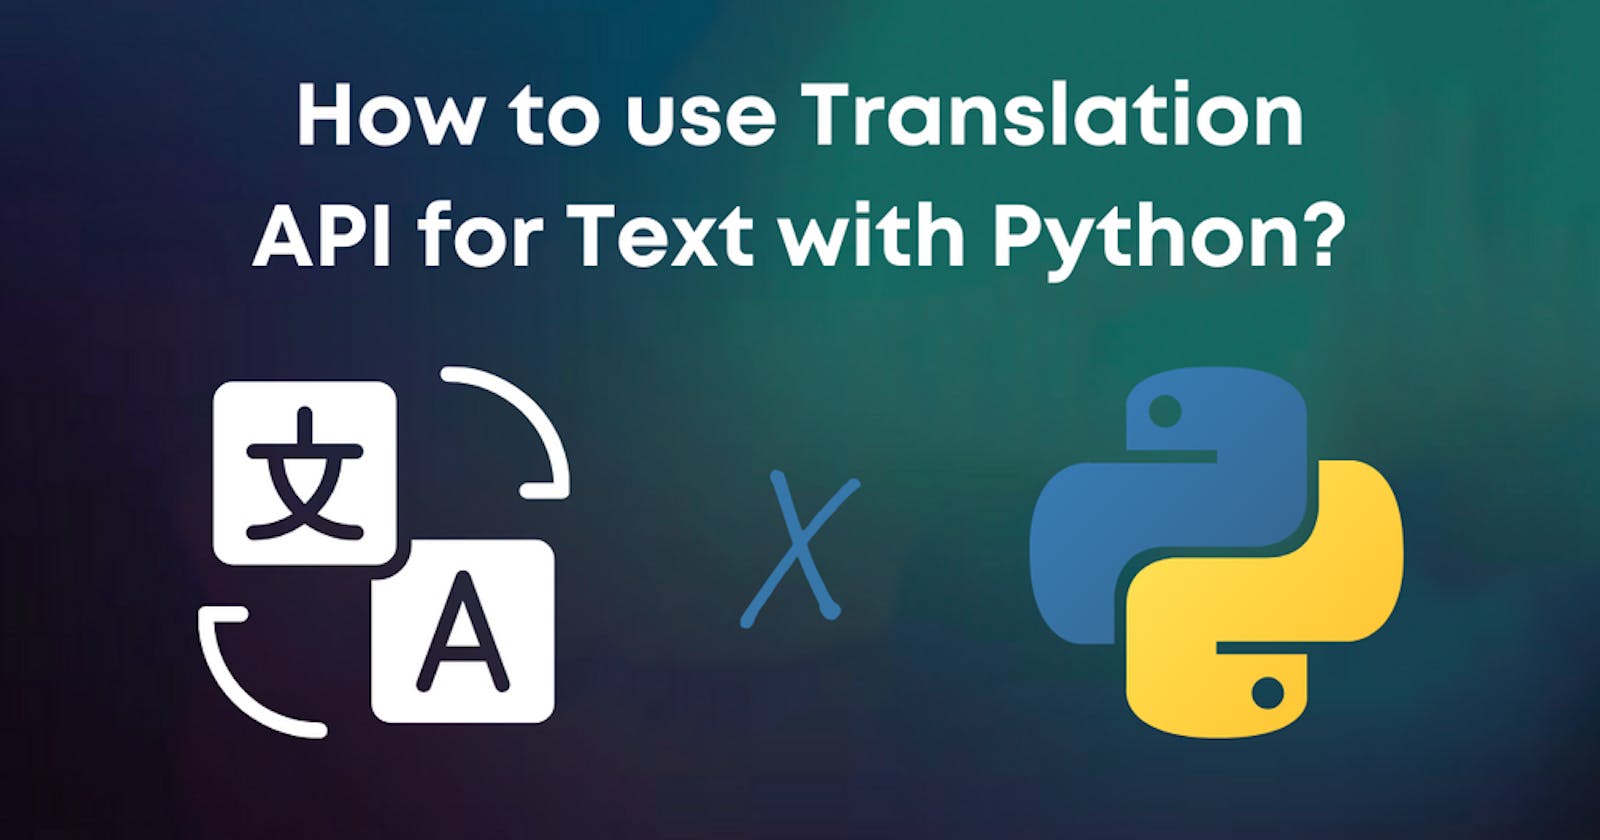 How to use Translation API for Text with Python in 5 minutes?